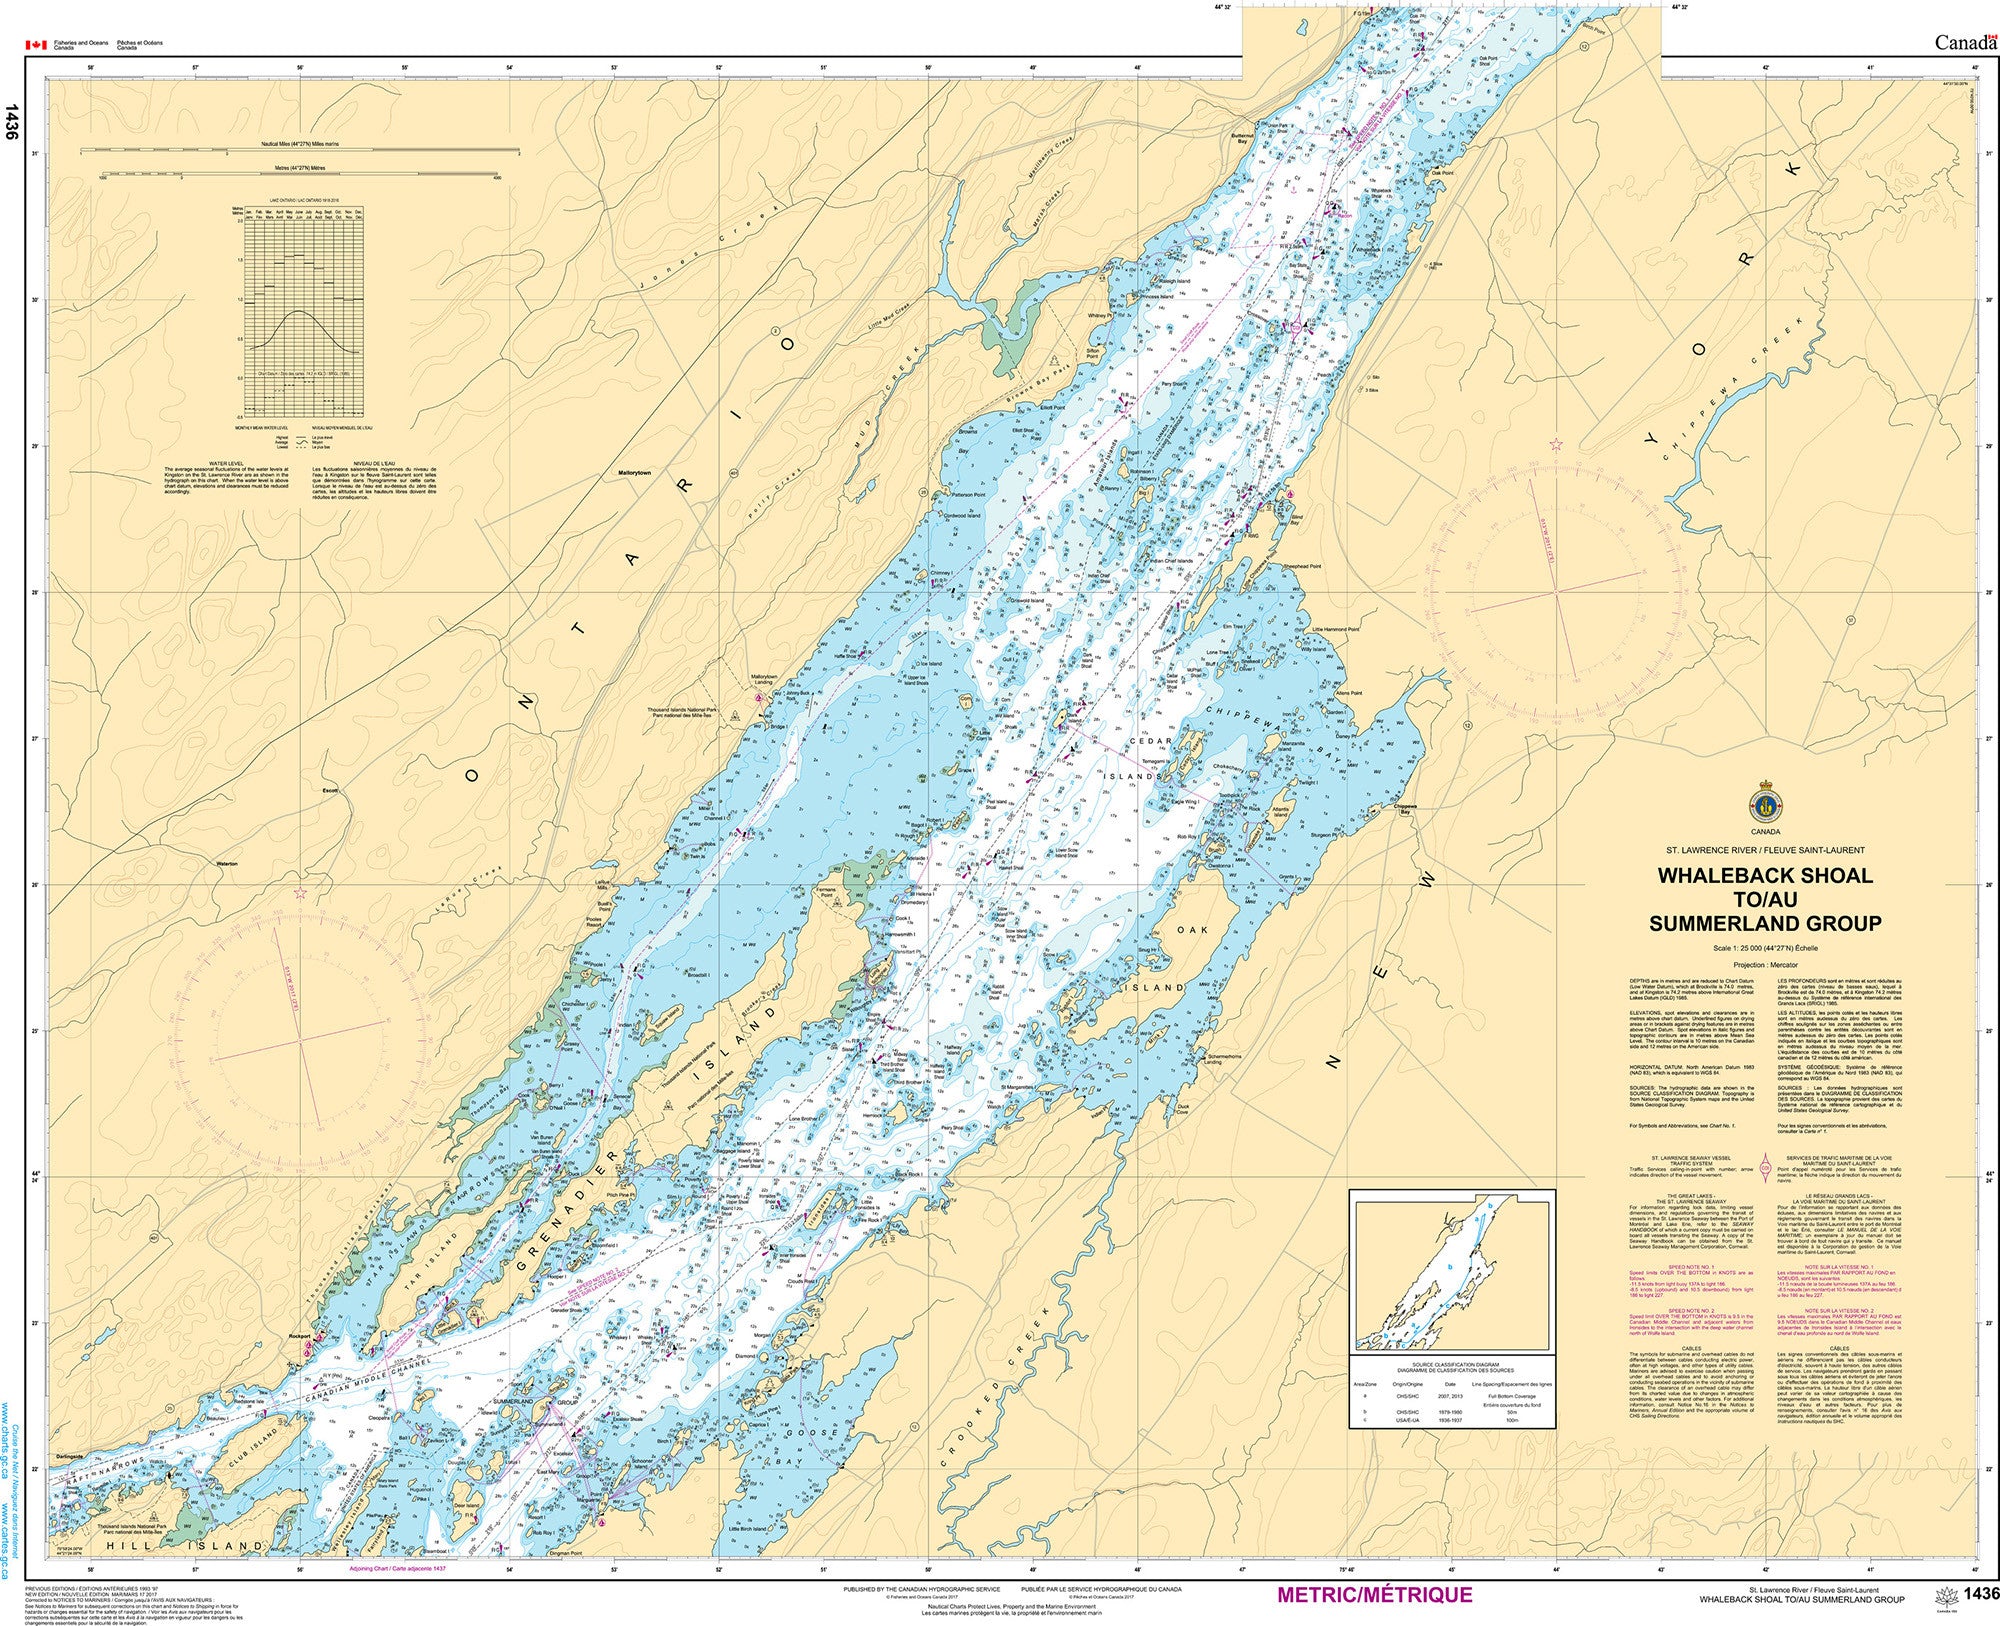 Canadian Hydrographic Service Nautical Chart CHS1436: Whaleback Shoal to/au Summerland Group